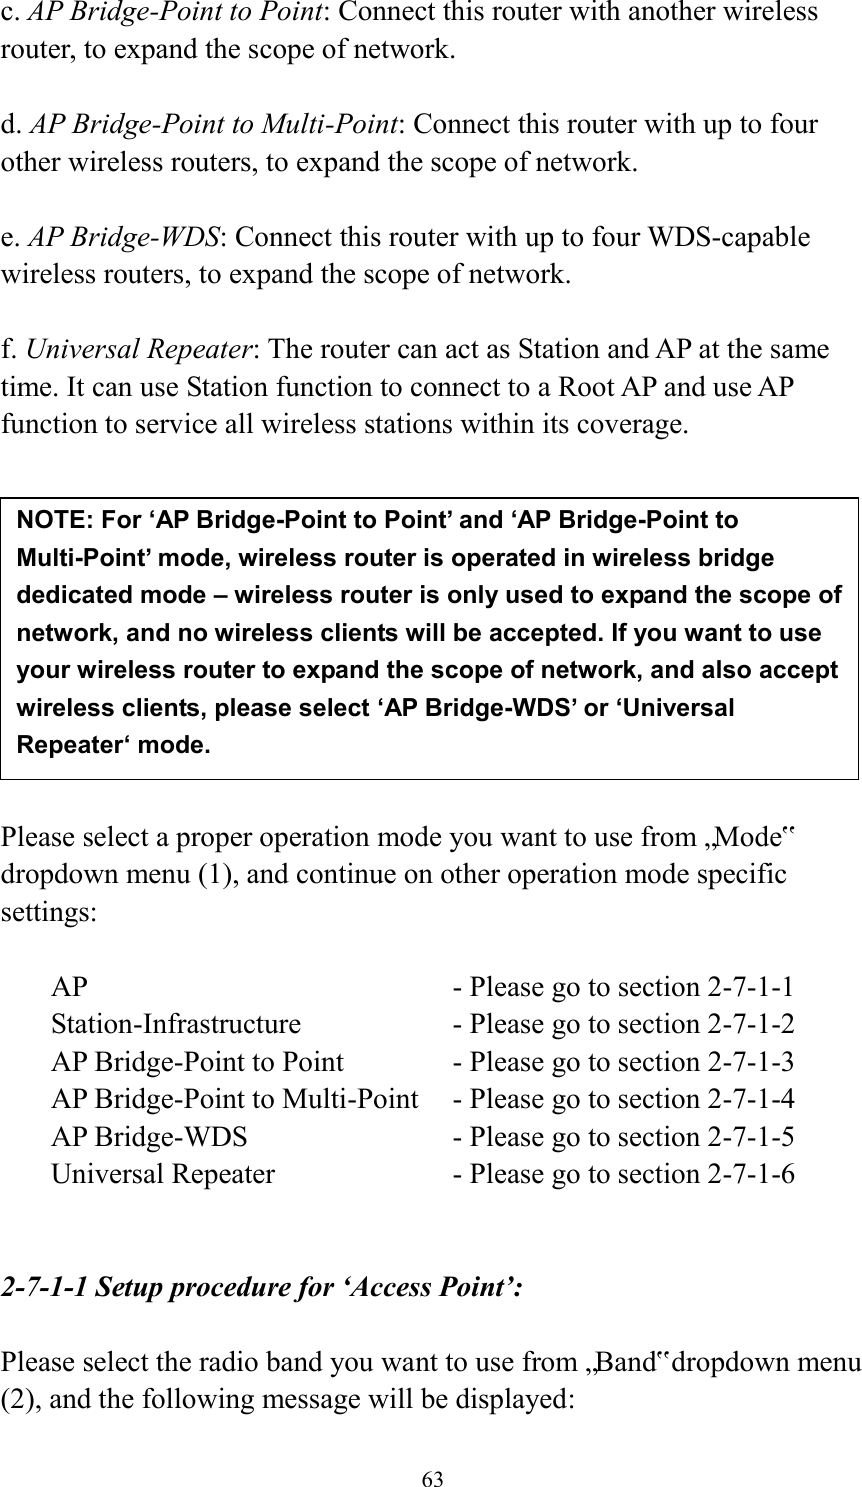  63 c. AP Bridge-Point to Point: Connect this router with another wireless router, to expand the scope of network.    d. AP Bridge-Point to Multi-Point: Connect this router with up to four other wireless routers, to expand the scope of network.  e. AP Bridge-WDS: Connect this router with up to four WDS-capable wireless routers, to expand the scope of network.  f. Universal Repeater: The router can act as Station and AP at the same time. It can use Station function to connect to a Root AP and use AP function to service all wireless stations within its coverage.           Please select a proper operation mode you want to use from „Mode‟ dropdown menu (1), and continue on other operation mode specific settings:  AP                - Please go to section 2-7-1-1 Station-Infrastructure        - Please go to section 2-7-1-2 AP Bridge-Point to Point     - Please go to section 2-7-1-3 AP Bridge-Point to Multi-Point  - Please go to section 2-7-1-4 AP Bridge-WDS         - Please go to section 2-7-1-5 Universal Repeater          - Please go to section 2-7-1-6   2-7-1-1 Setup procedure for ‘Access Point’:  Please select the radio band you want to use from „Band‟ dropdown menu (2), and the following message will be displayed: NOTE: For ‘AP Bridge-Point to Point’ and ‘AP Bridge-Point to Multi-Point’ mode, wireless router is operated in wireless bridge dedicated mode – wireless router is only used to expand the scope of network, and no wireless clients will be accepted. If you want to use your wireless router to expand the scope of network, and also accept wireless clients, please select ‘AP Bridge-WDS’ or ‘Universal Repeater‘ mode. 